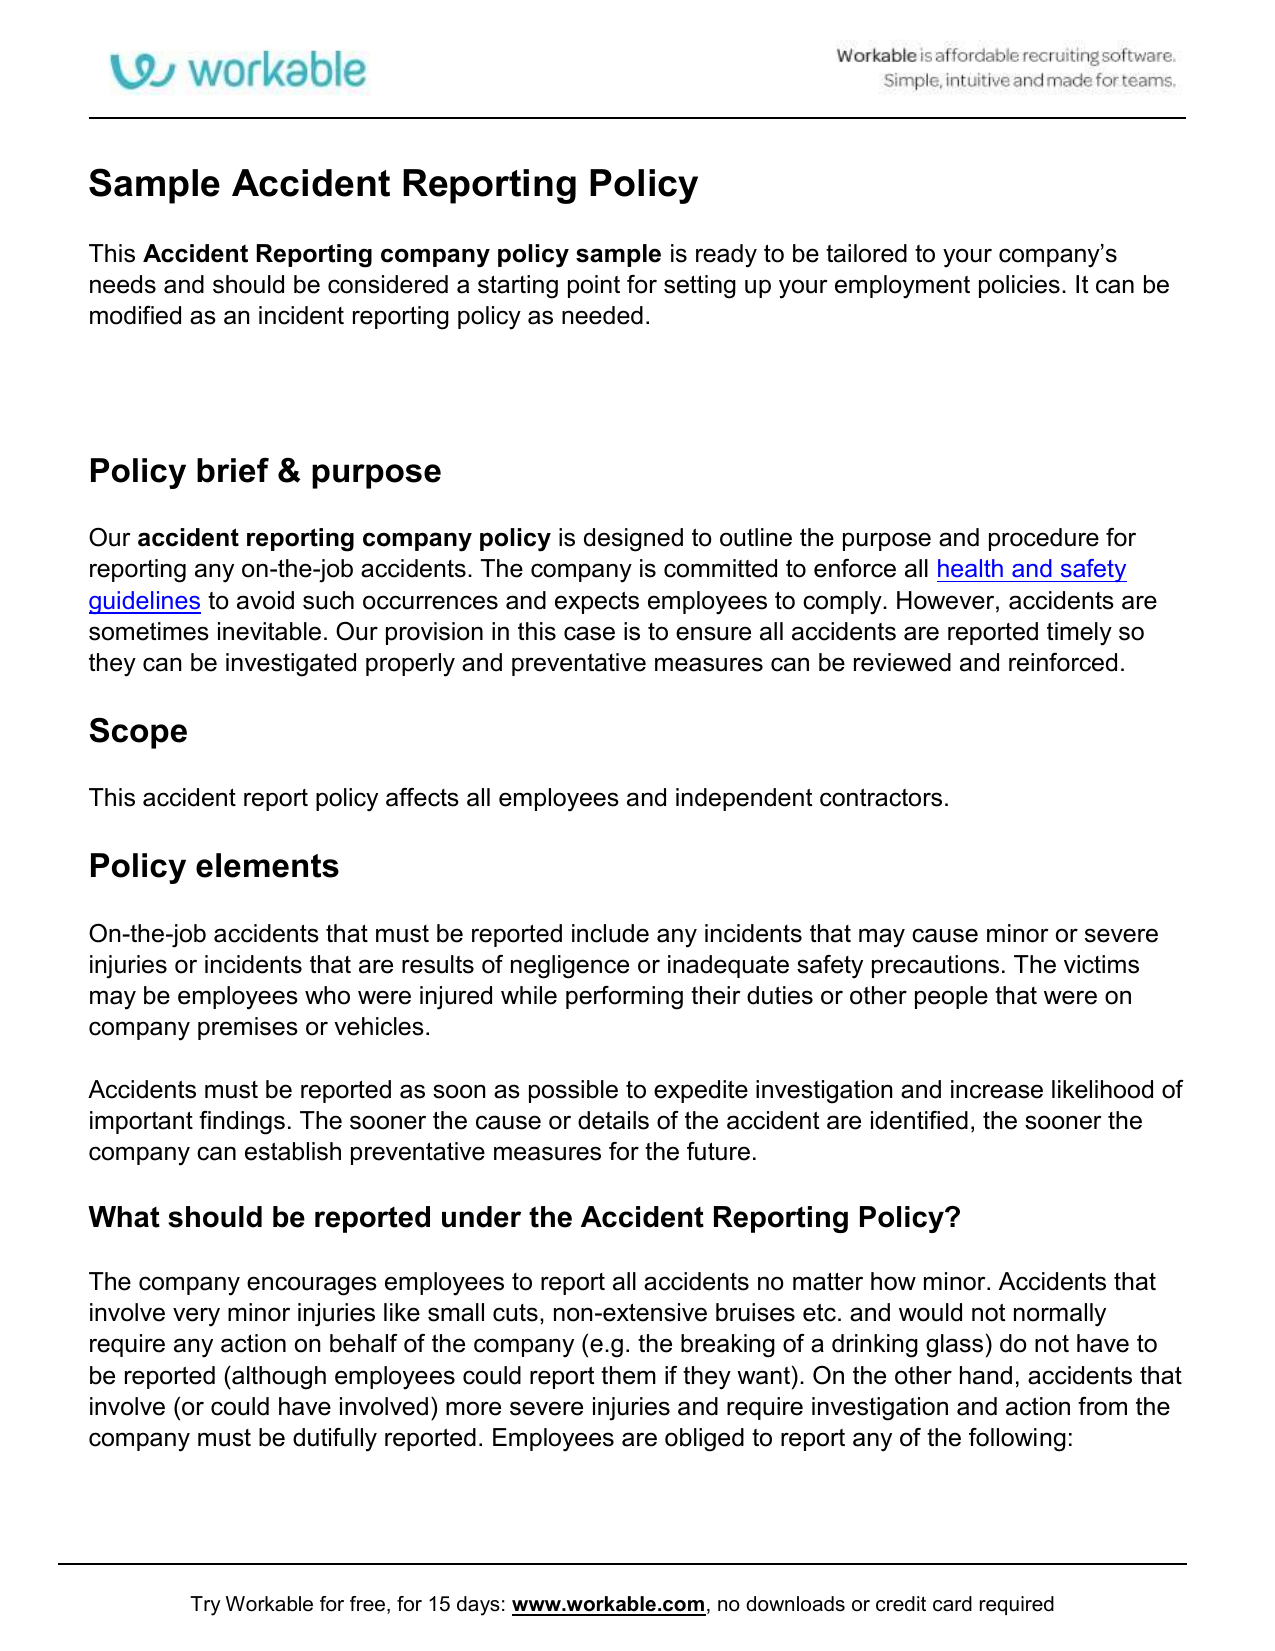 accident-reporting-policy